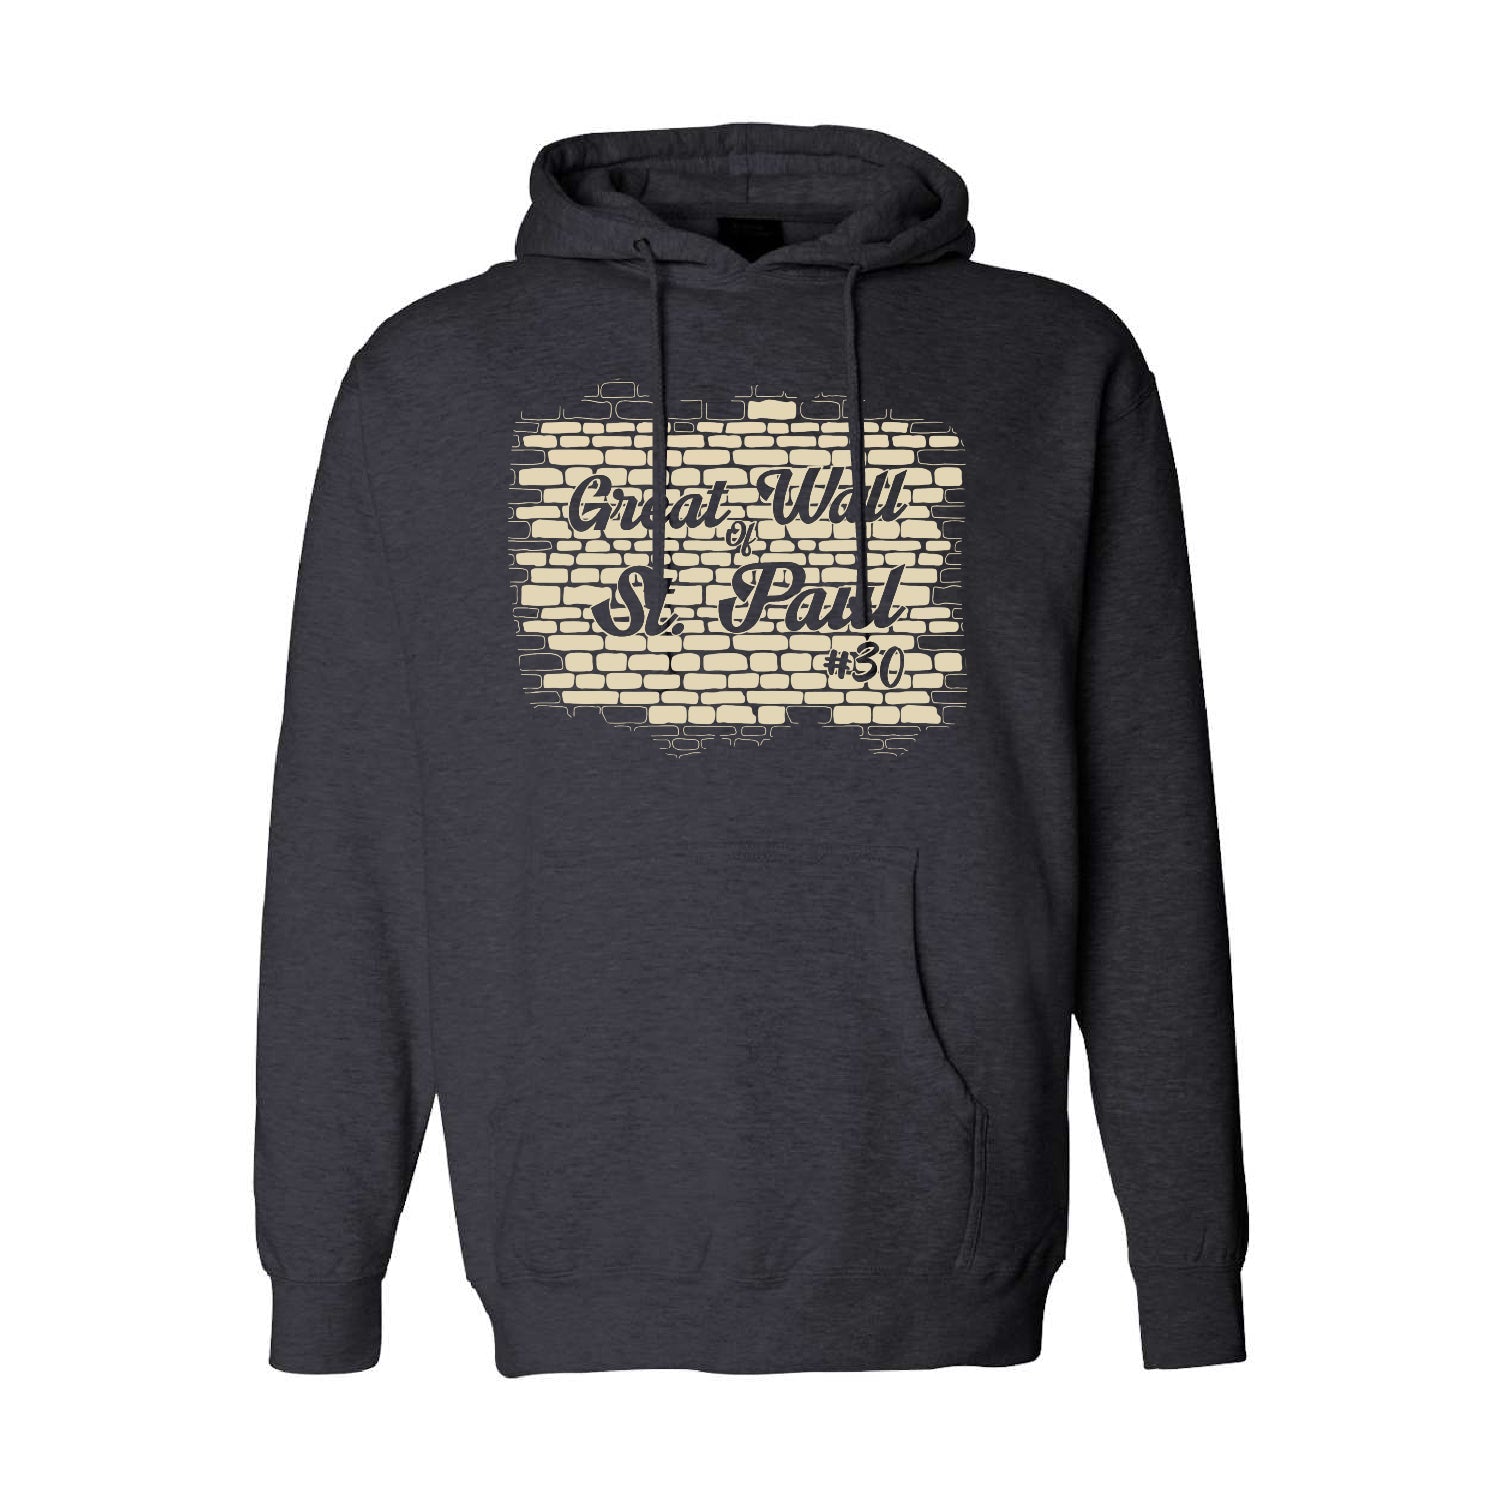 10K Takes Great Wall of St. Paul Heavyweight Hoodie - DSP On Demand